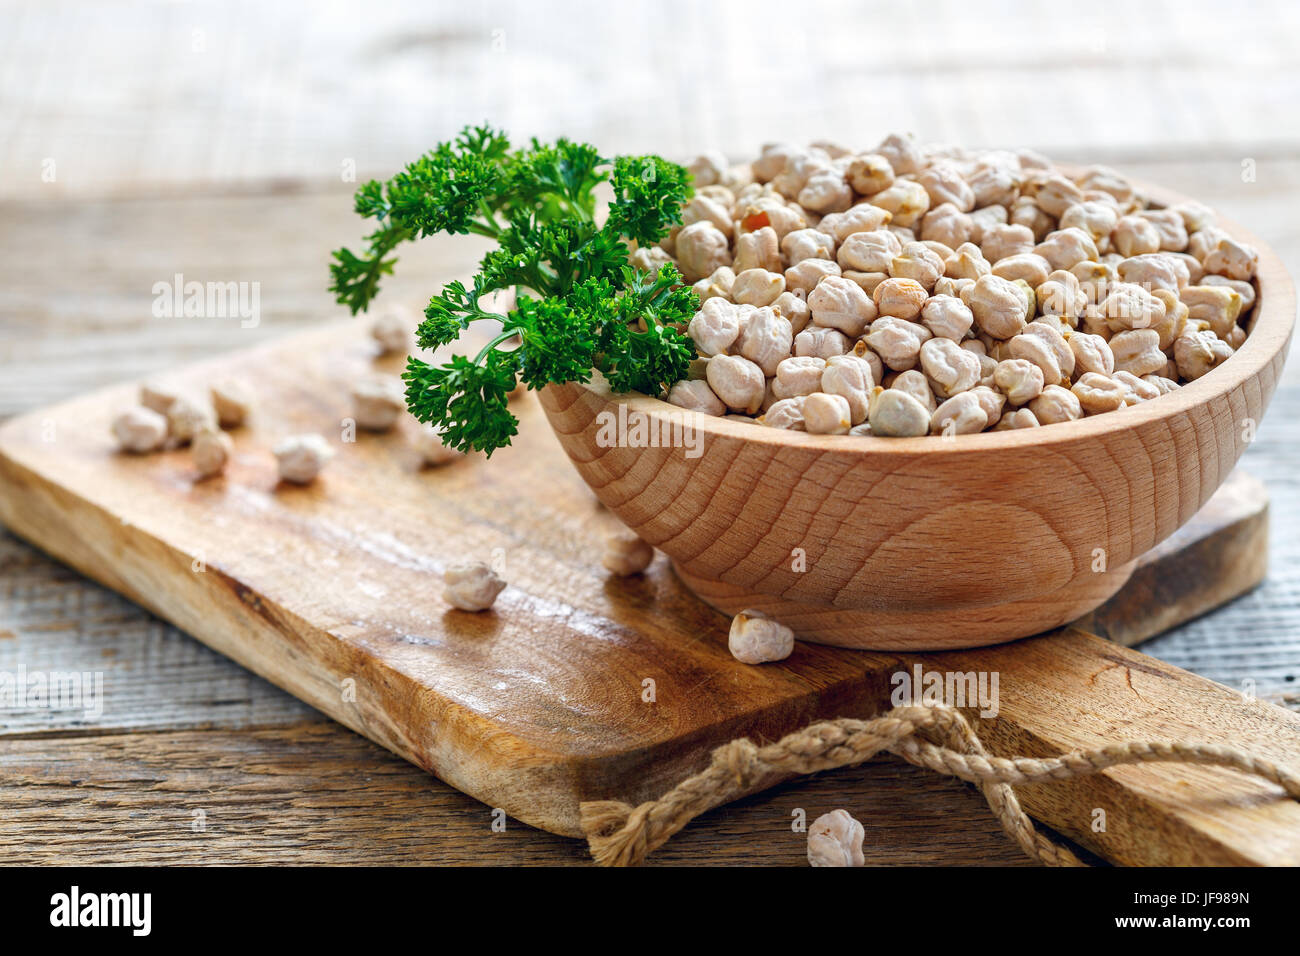 Chickpea and a sprig of parsley. Stock Photo